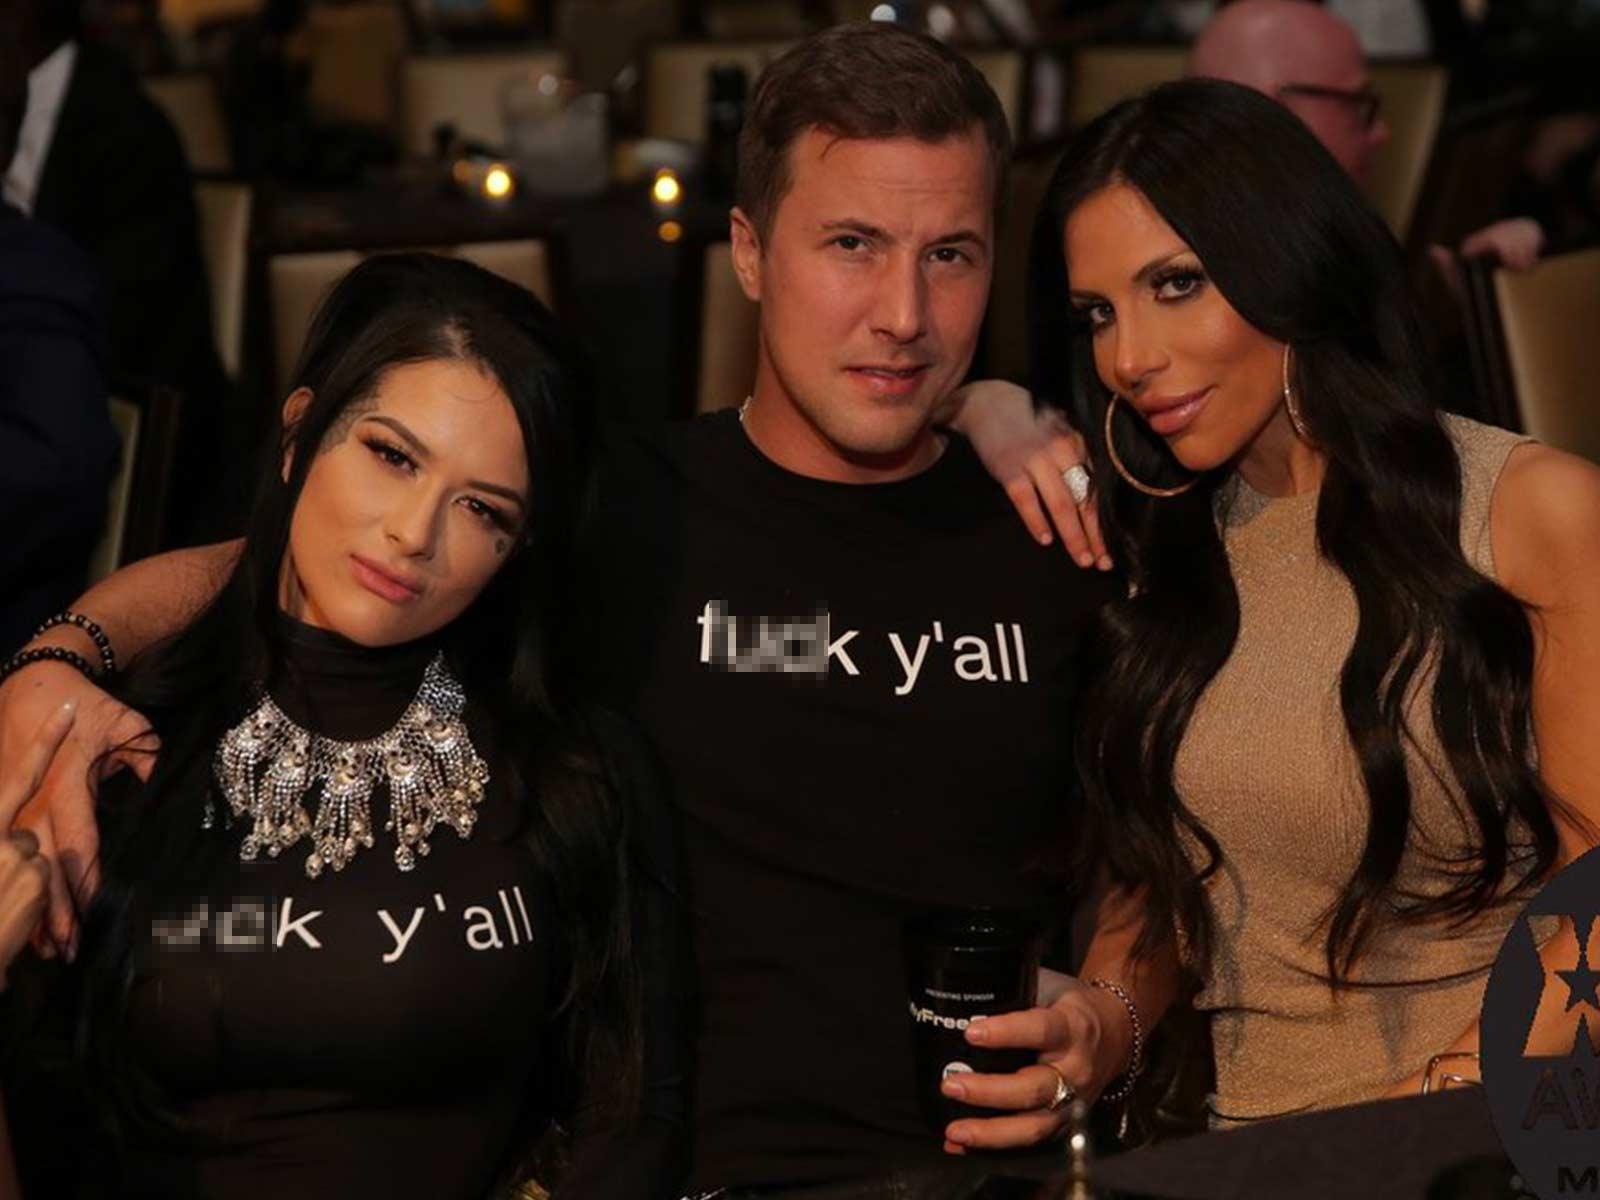 Pornstars Wear ‘F*** Y’all’ Shirts to Honor August Ames and Protest Bullying at Awards Show